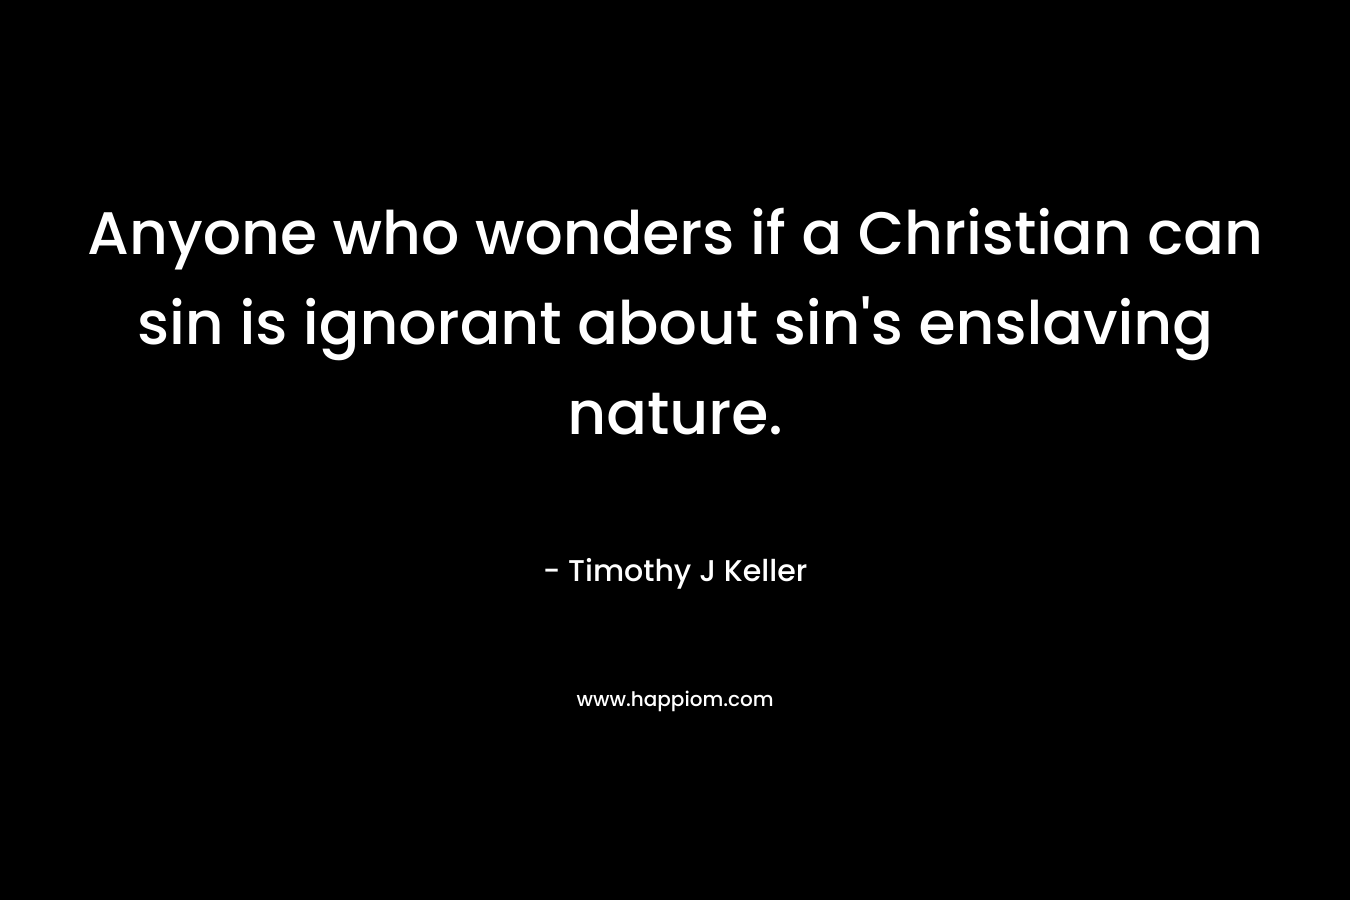 Anyone who wonders if a Christian can sin is ignorant about sin's enslaving nature.